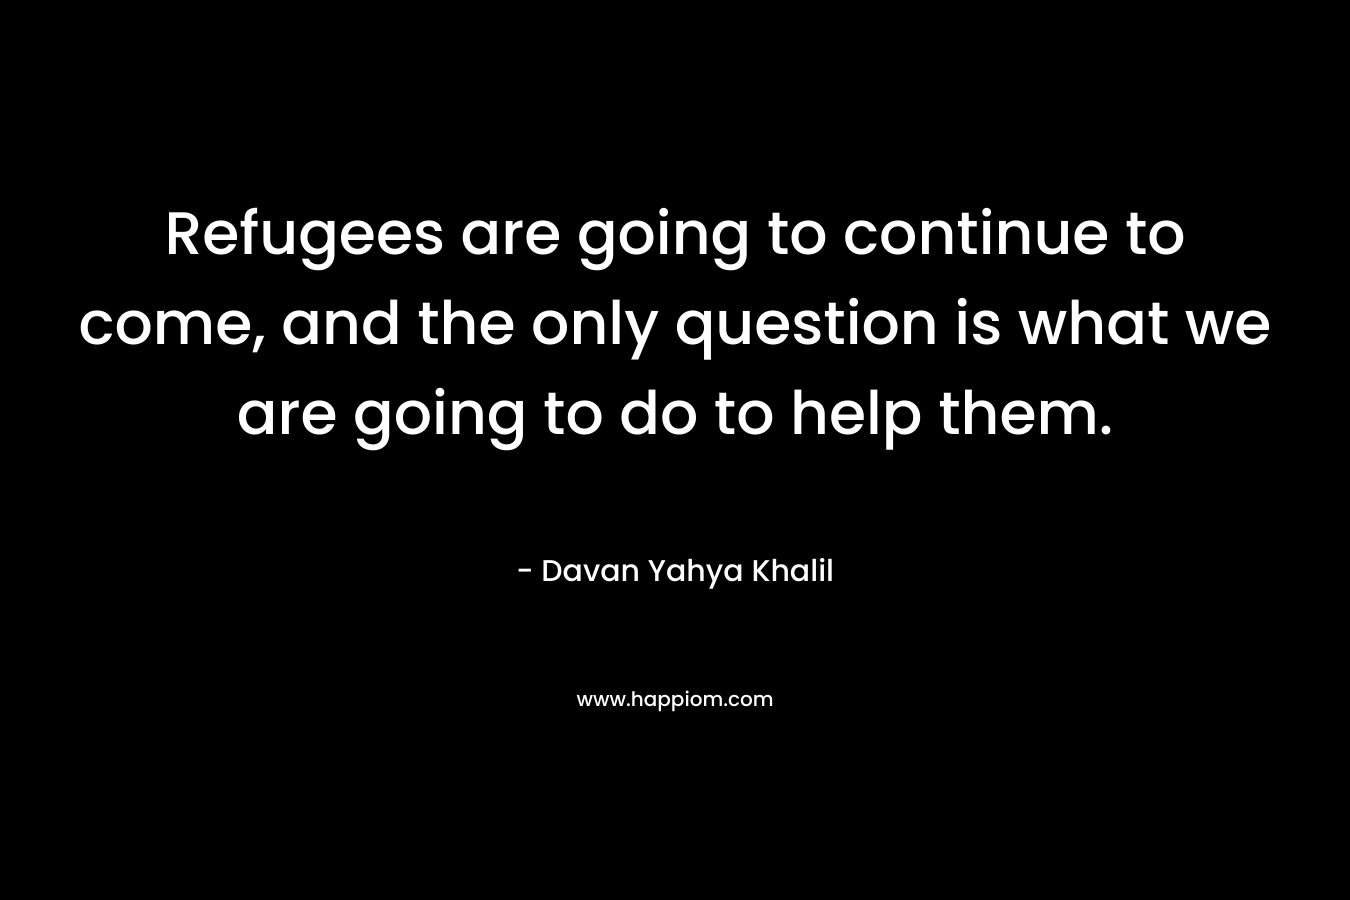 Refugees are going to continue to come, and the only question is what we are going to do to help them. – Davan Yahya Khalil